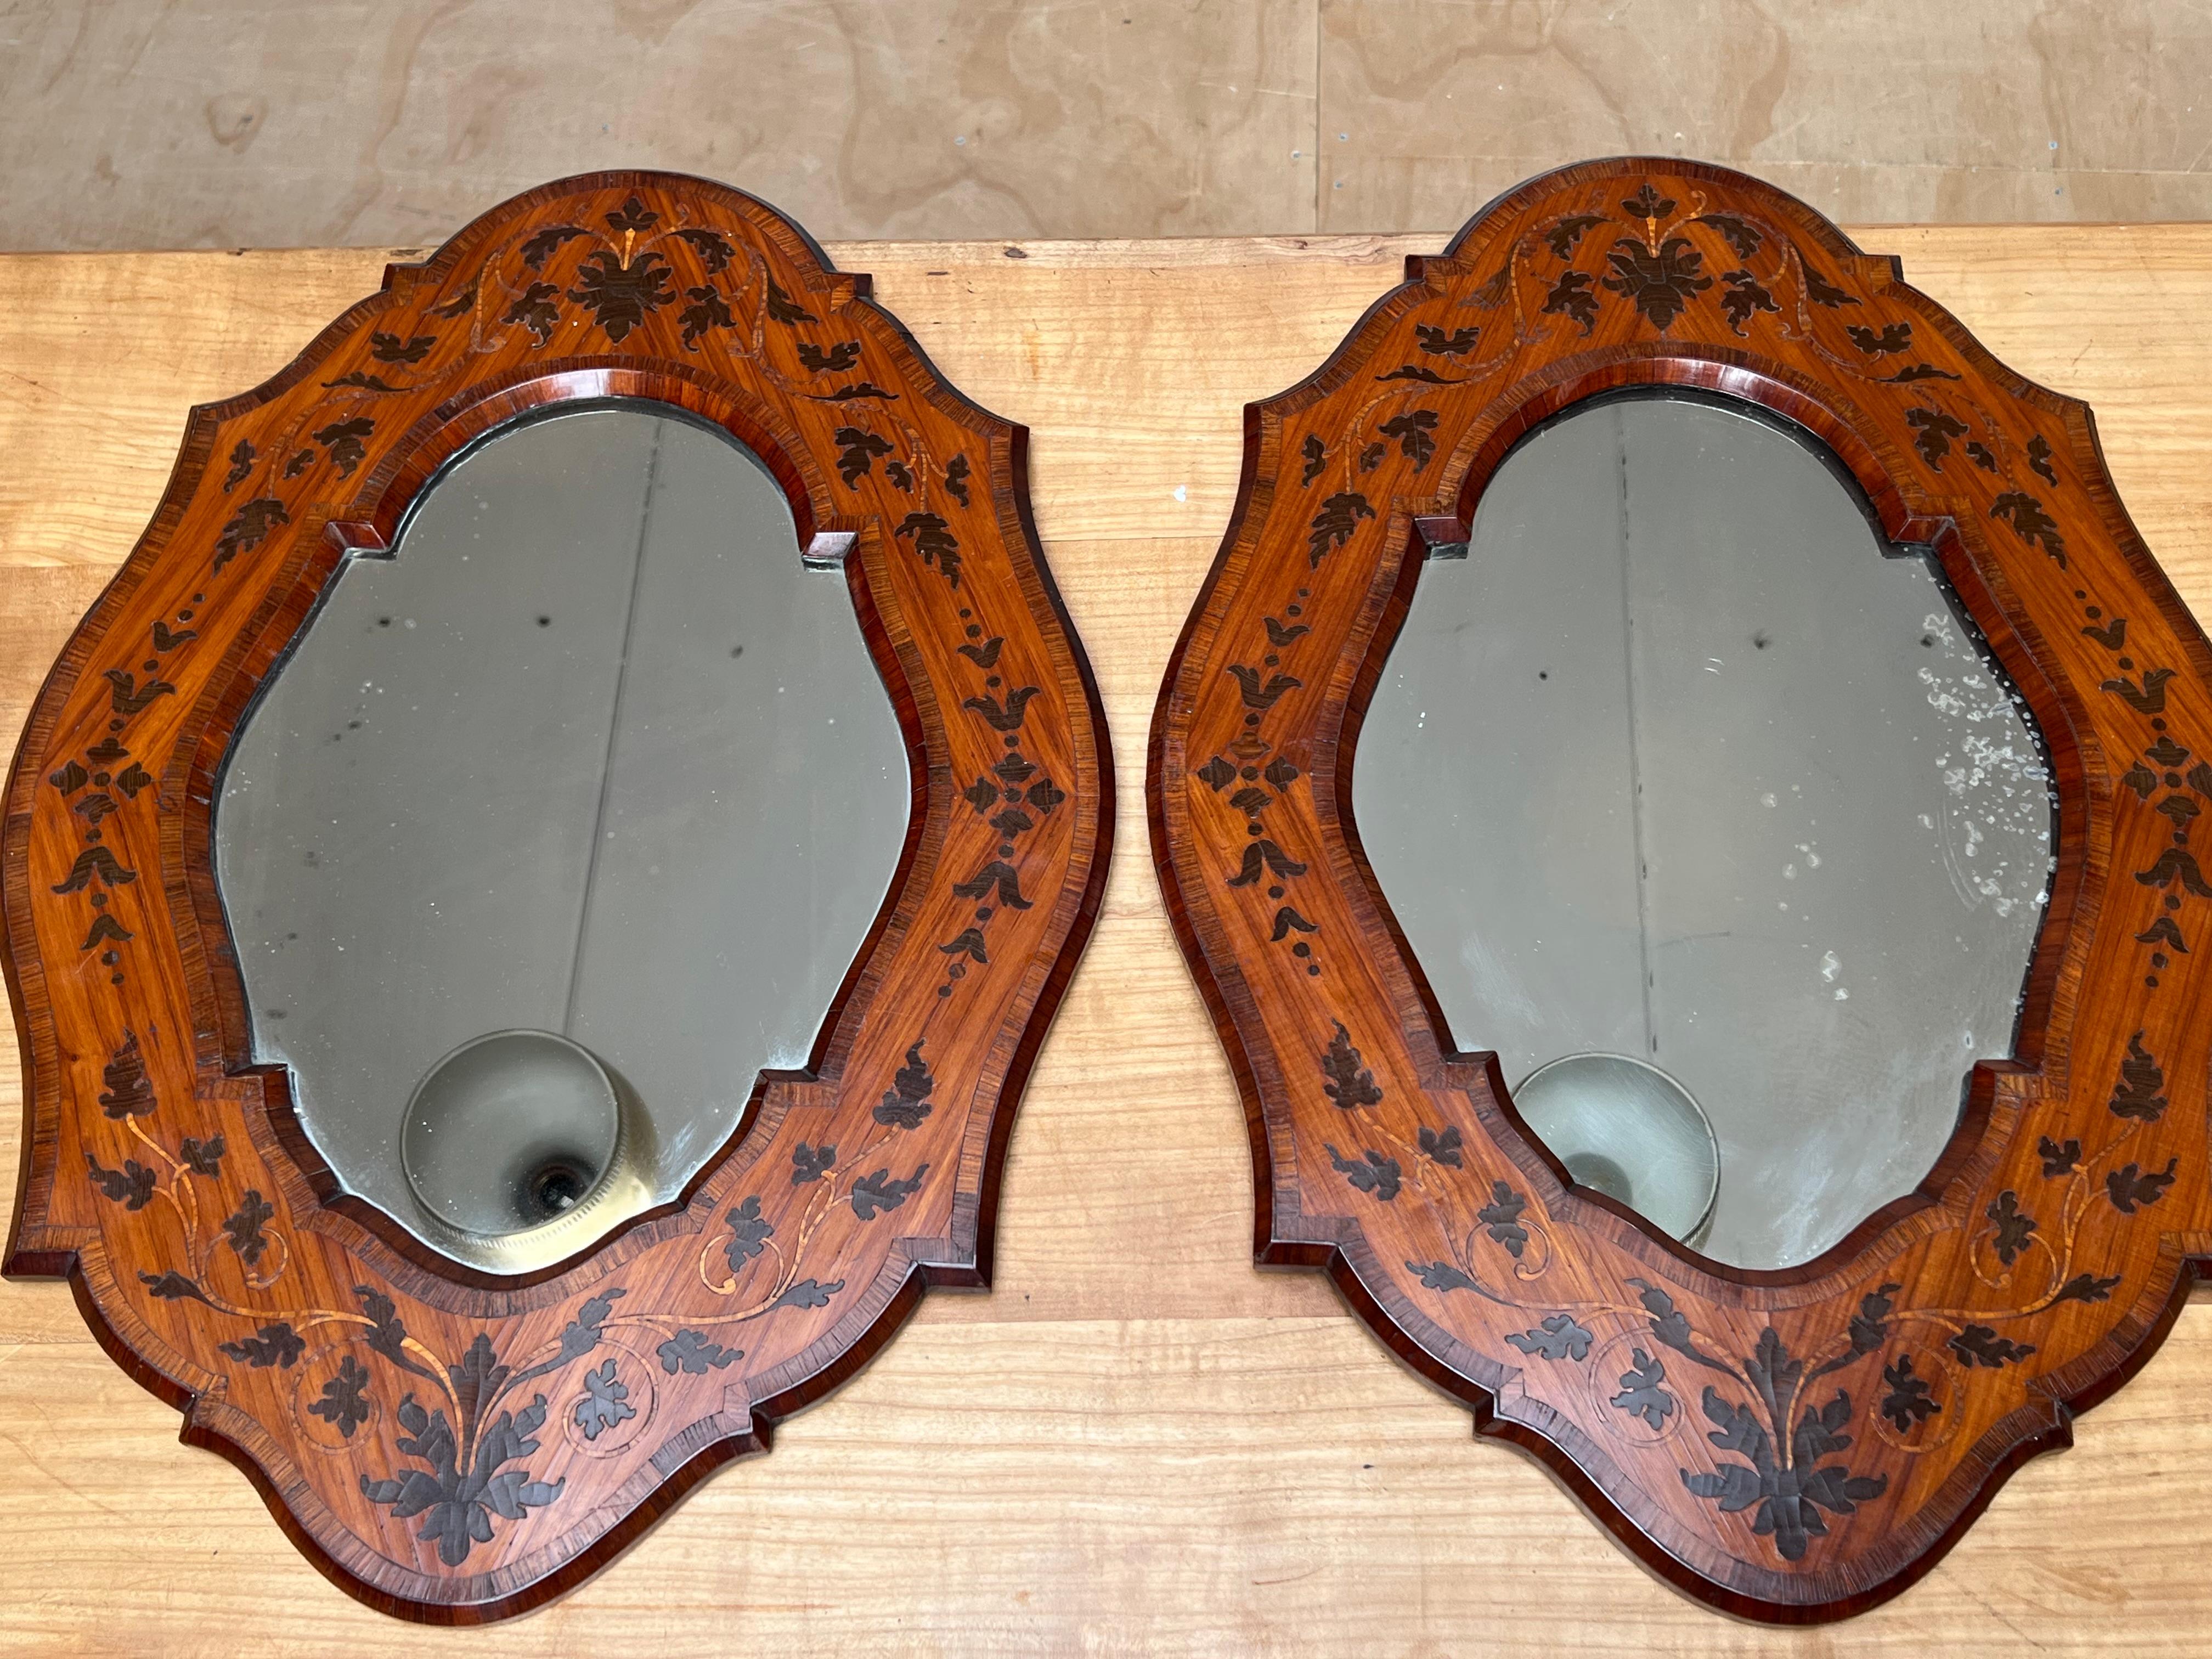 Unique Pair of Italian Wall Mirrors Kingwood Marquetry Inlay Frames, circa 1870 For Sale 8